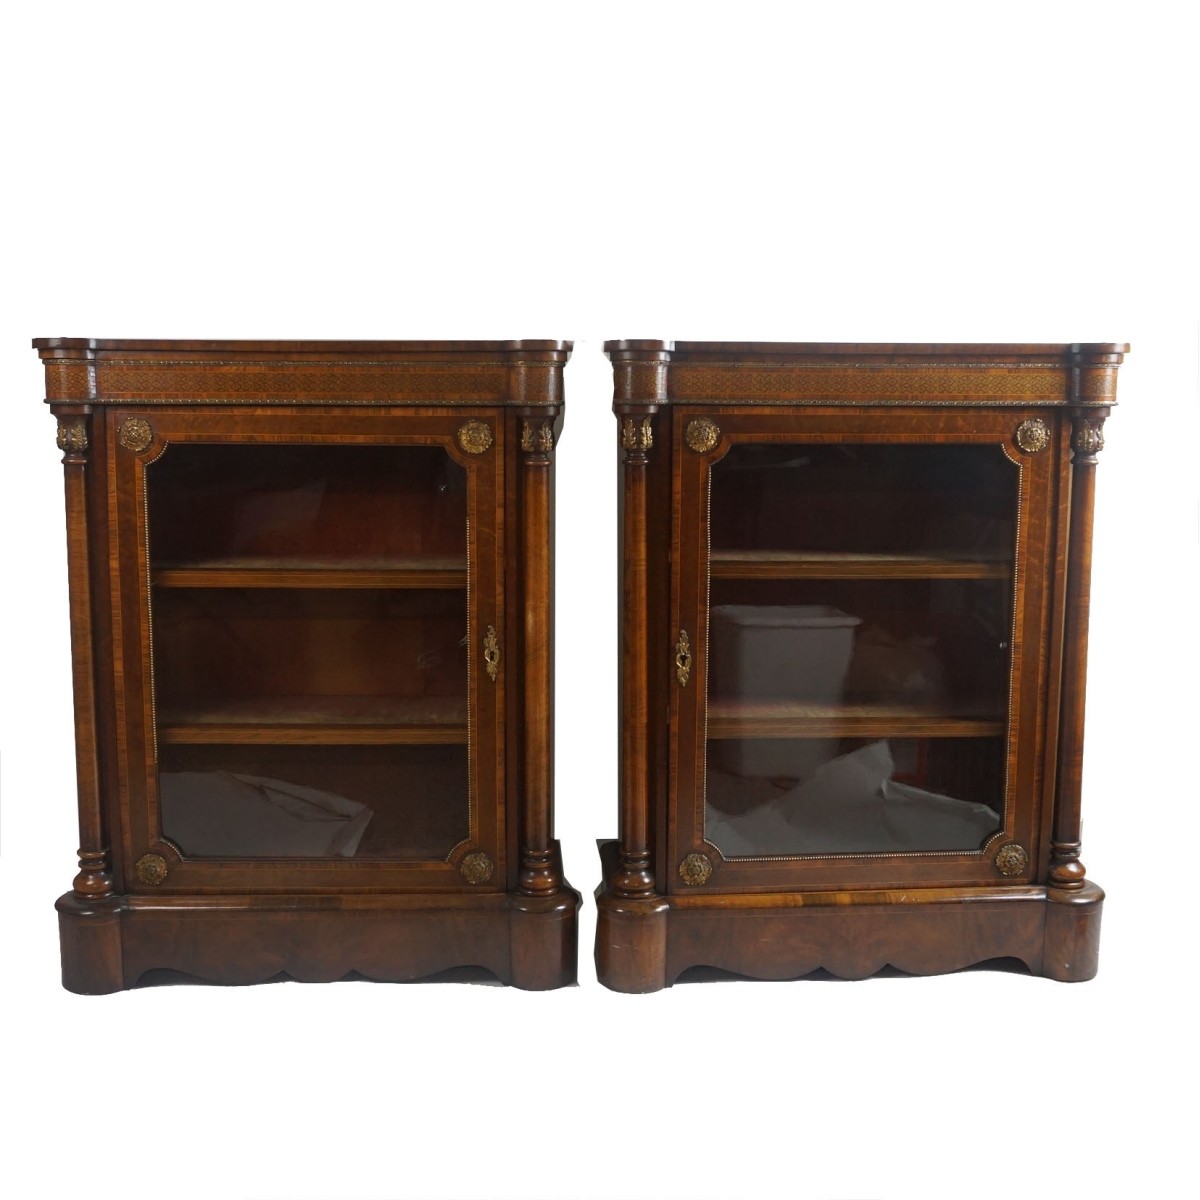 Pair of Cabinets / Book Cases